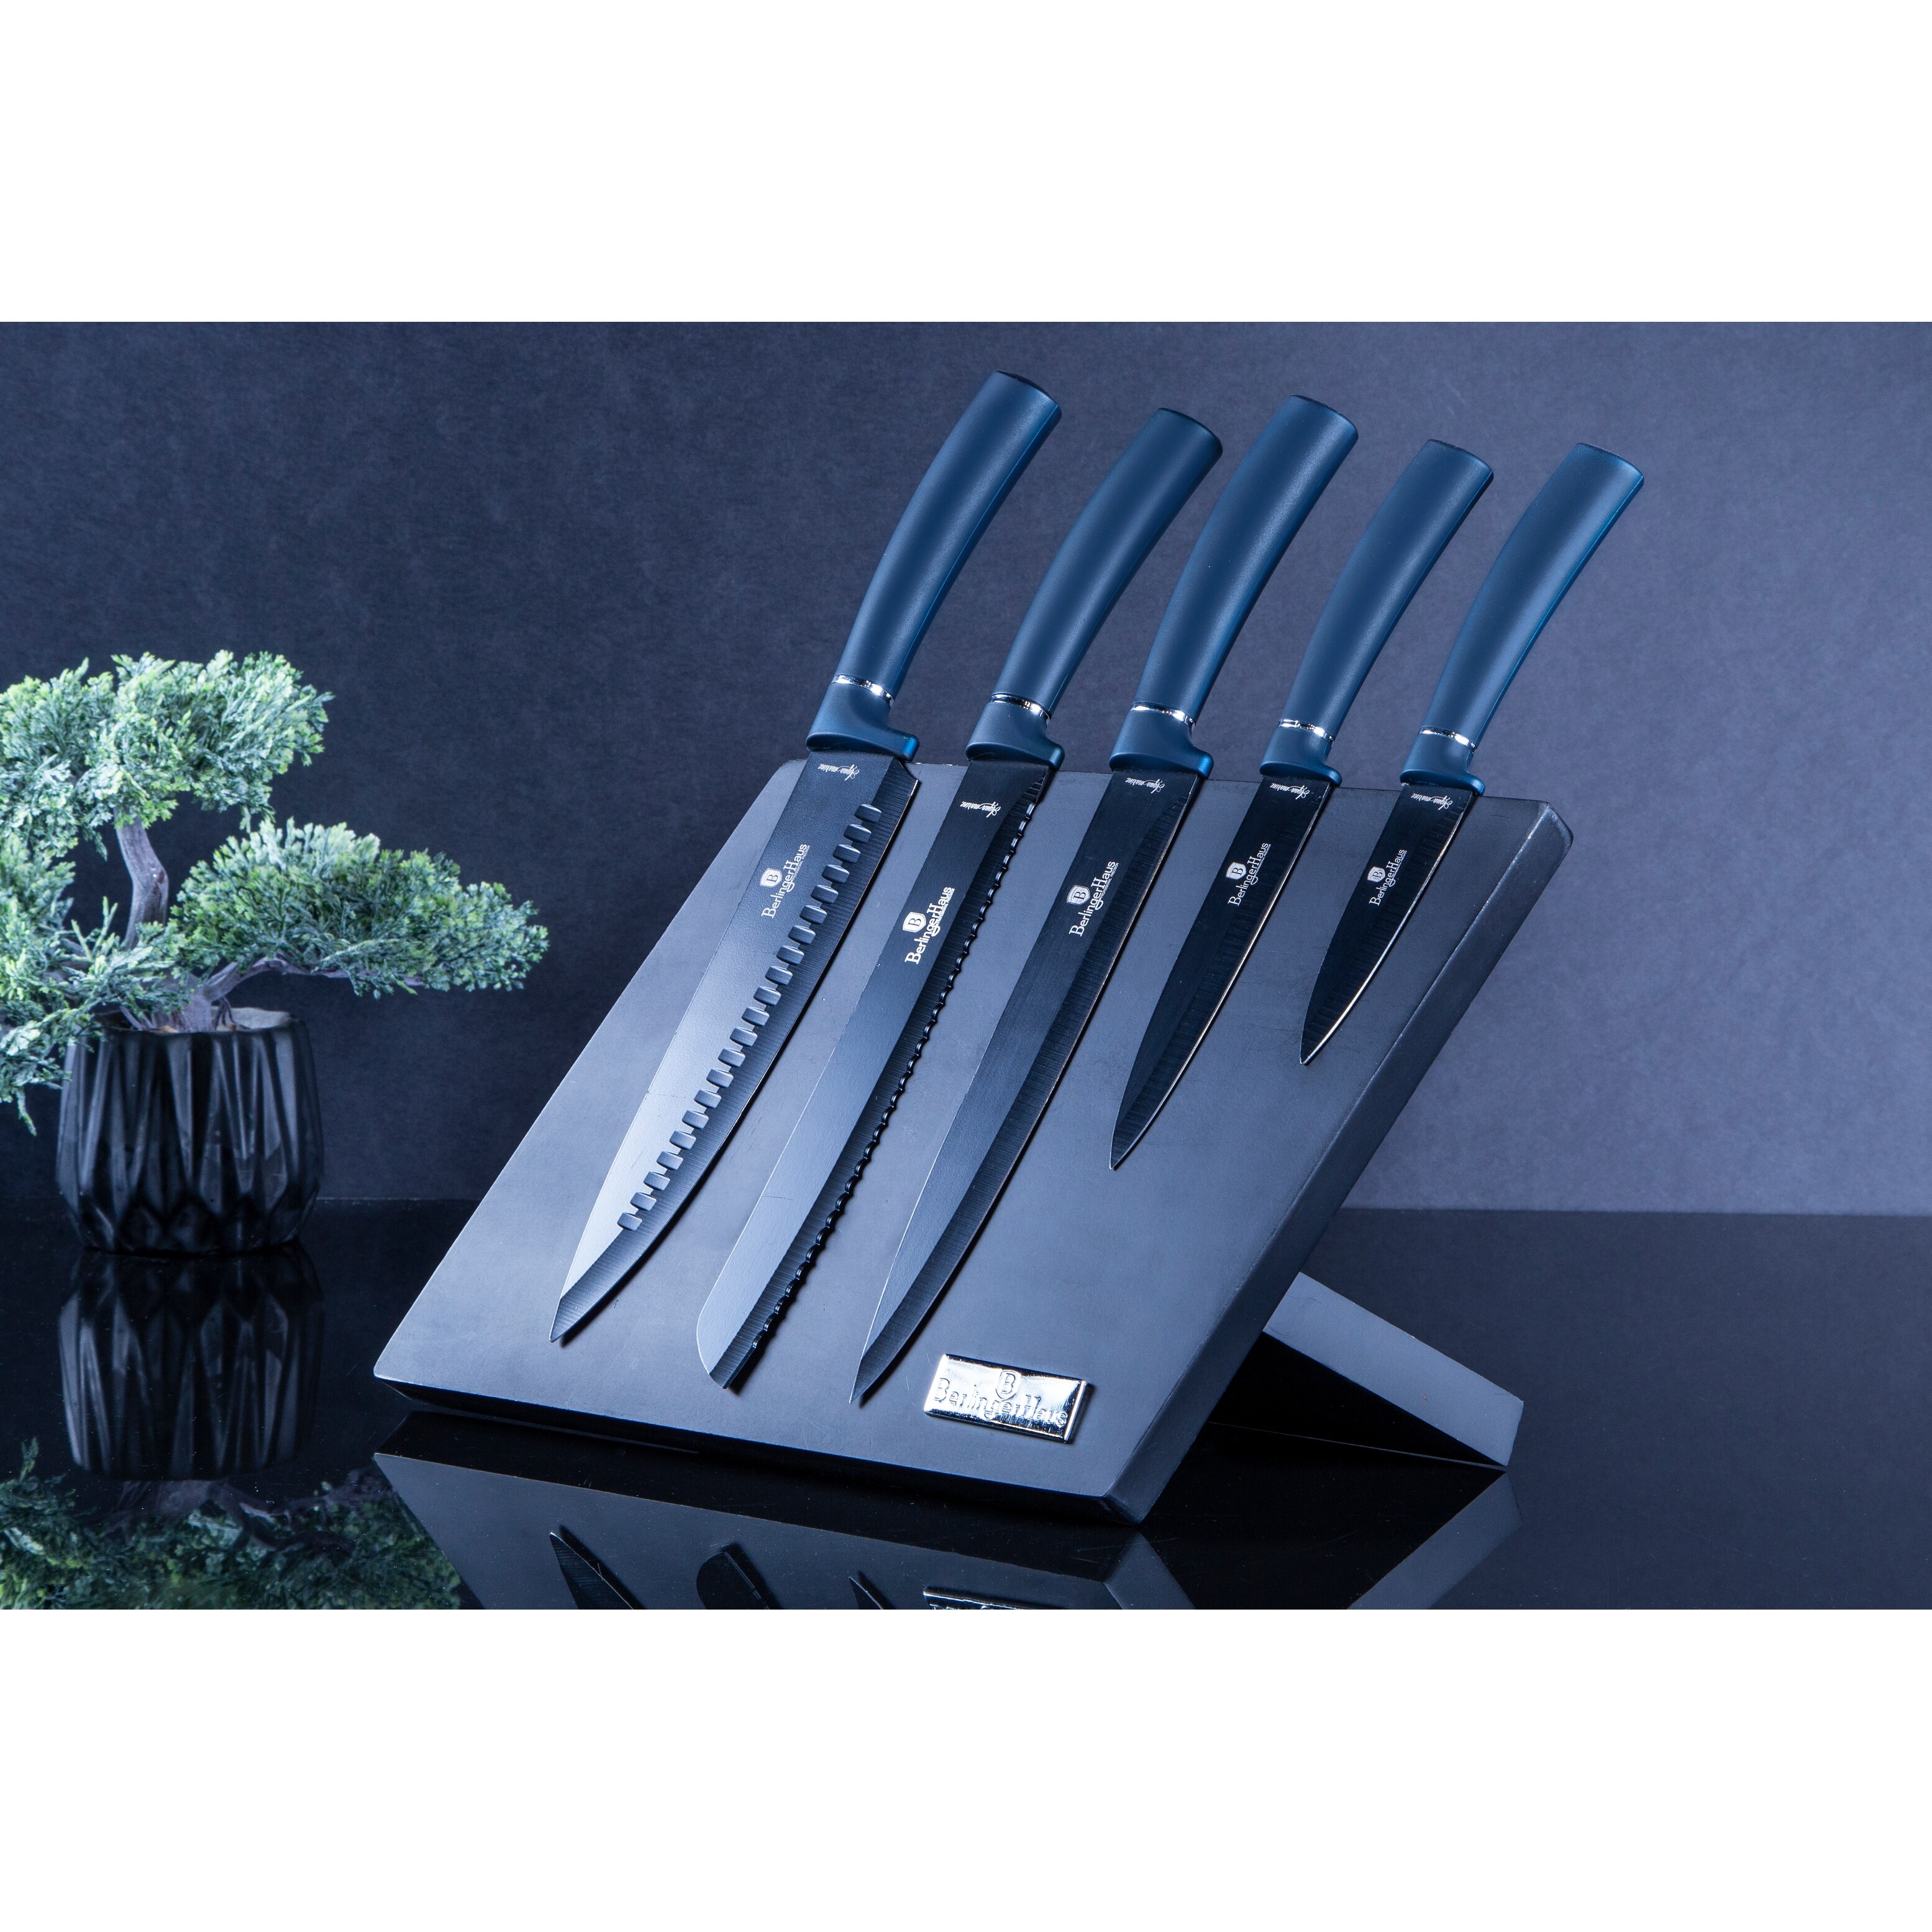 https://ak1.ostkcdn.com/images/products/is/images/direct/09624c1d34c29beb38bf849a9e761353f6281aa2/Berlinger-Haus-6-Piece-Knife-Set-w--Magnetic-Hanger%2C-Aquamarine-Collection.jpg